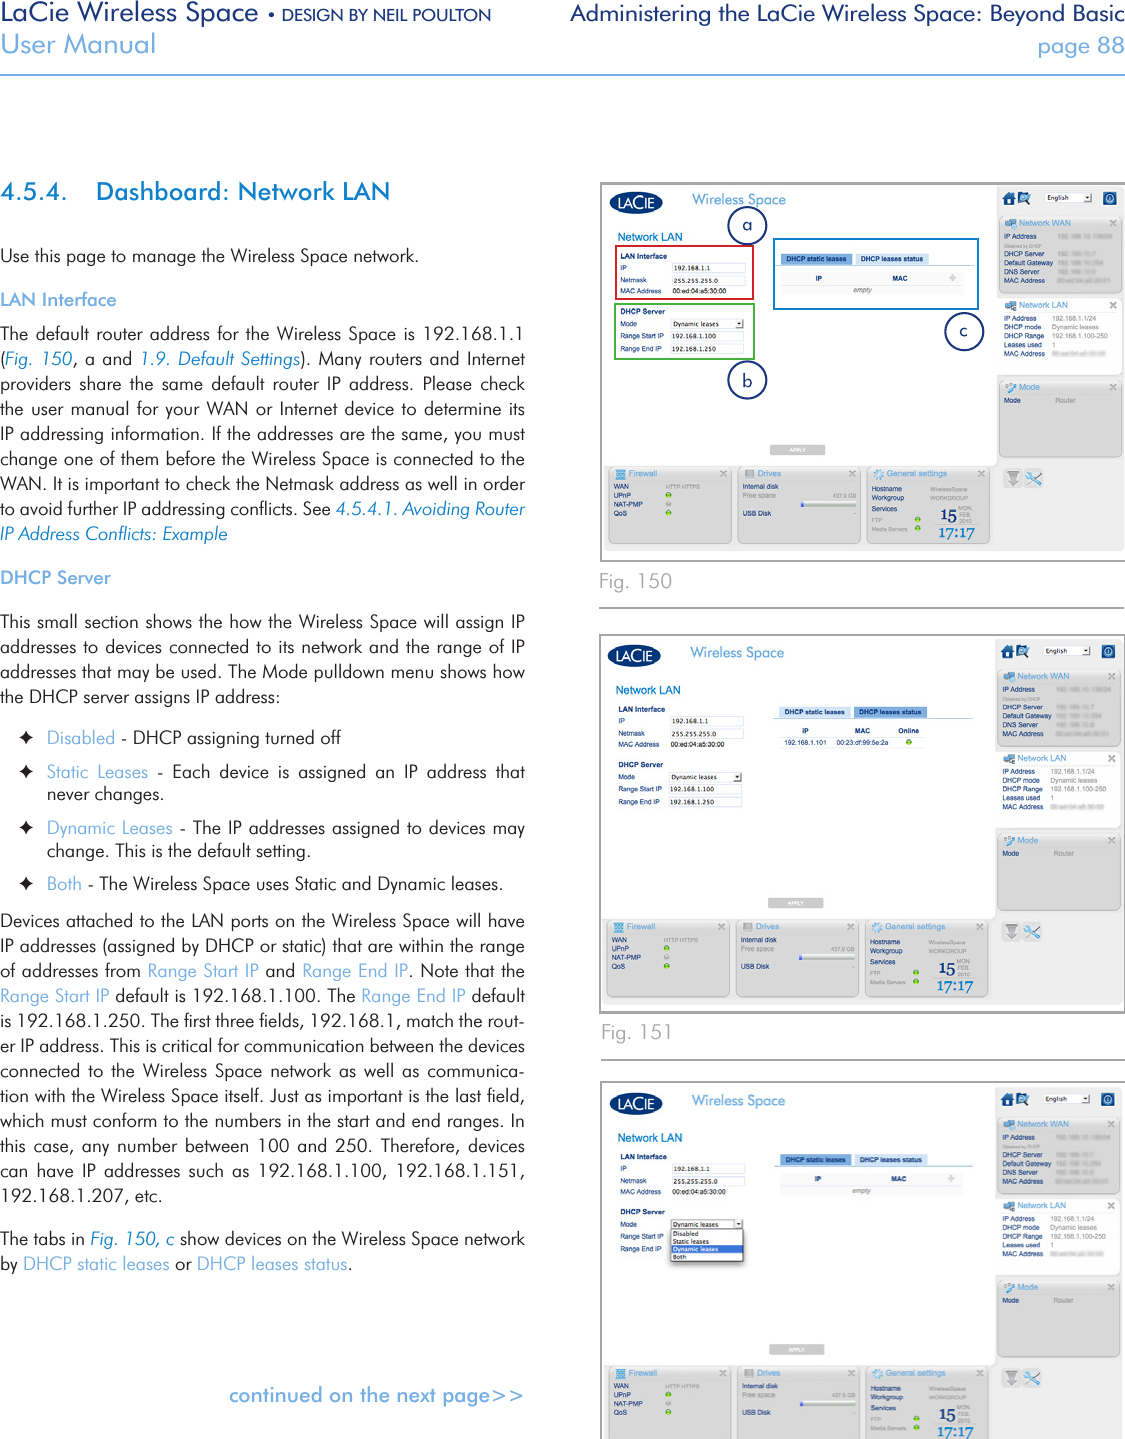 LaCie Wireless Space • DESIGN BY NEIL POULTON Administering the LaCie Wireless Space: Beyond BasicUser Manual  page 884.5.4.  Dashboard: Network LANUse this page to manage the Wireless Space network.LAN InterfaceThe default router  address for the Wireless Space is  192.168.1.1 (Fig. 150, a and 1.9. Default Settings).  Many routers and Internet providers  share  the  same  default  router  IP  address.  Please  check the user manual for your WAN  or Internet device to determine its IP addressing information. If the addresses are the same, you must change one of them before the Wireless Space is connected to the WAN. It is important to check the Netmask address as well in order to avoid further IP addressing conﬂicts. See 4.5.4.1. Avoiding Router IP Address Conﬂicts: ExampleDHCP ServerThis small section shows the how the Wireless Space will assign IP addresses to devices connected to its network and the range of IP addresses that may be used. The Mode pulldown menu shows how the DHCP server assigns IP address: ✦Disabled - DHCP assigning turned off ✦Static  Leases  -  Each  device  is  assigned  an  IP  address  that never changes. ✦Dynamic Leases - The IP addresses assigned to devices may change. This is the default setting. ✦Both - The Wireless Space uses Static and Dynamic leases.Devices attached to the LAN ports on the Wireless Space will have IP addresses (assigned by DHCP or static) that are within the range of addresses from Range Start IP and Range End IP. Note that the Range Start IP default is 192.168.1.100. The Range End IP default is 192.168.1.250. The ﬁrst three ﬁelds, 192.168.1, match the rout-er IP address. This is critical for communication between the devices connected  to  the  Wireless  Space  network  as well  as communica-tion with the Wireless Space itself. Just as important is the last ﬁeld, which must conform to the numbers in the start and end ranges. In this  case,  any  number  between  100 and  250.  Therefore, devices can  have  IP  addresses  such  as  192.168.1.100,  192.168.1.151, 192.168.1.207, etc.The tabs in Fig. 150, c show devices on the Wireless Space network by DHCP static leases or DHCP leases status.continued on the next page&gt;&gt;Fig. 150Fig. 151Fig. 152